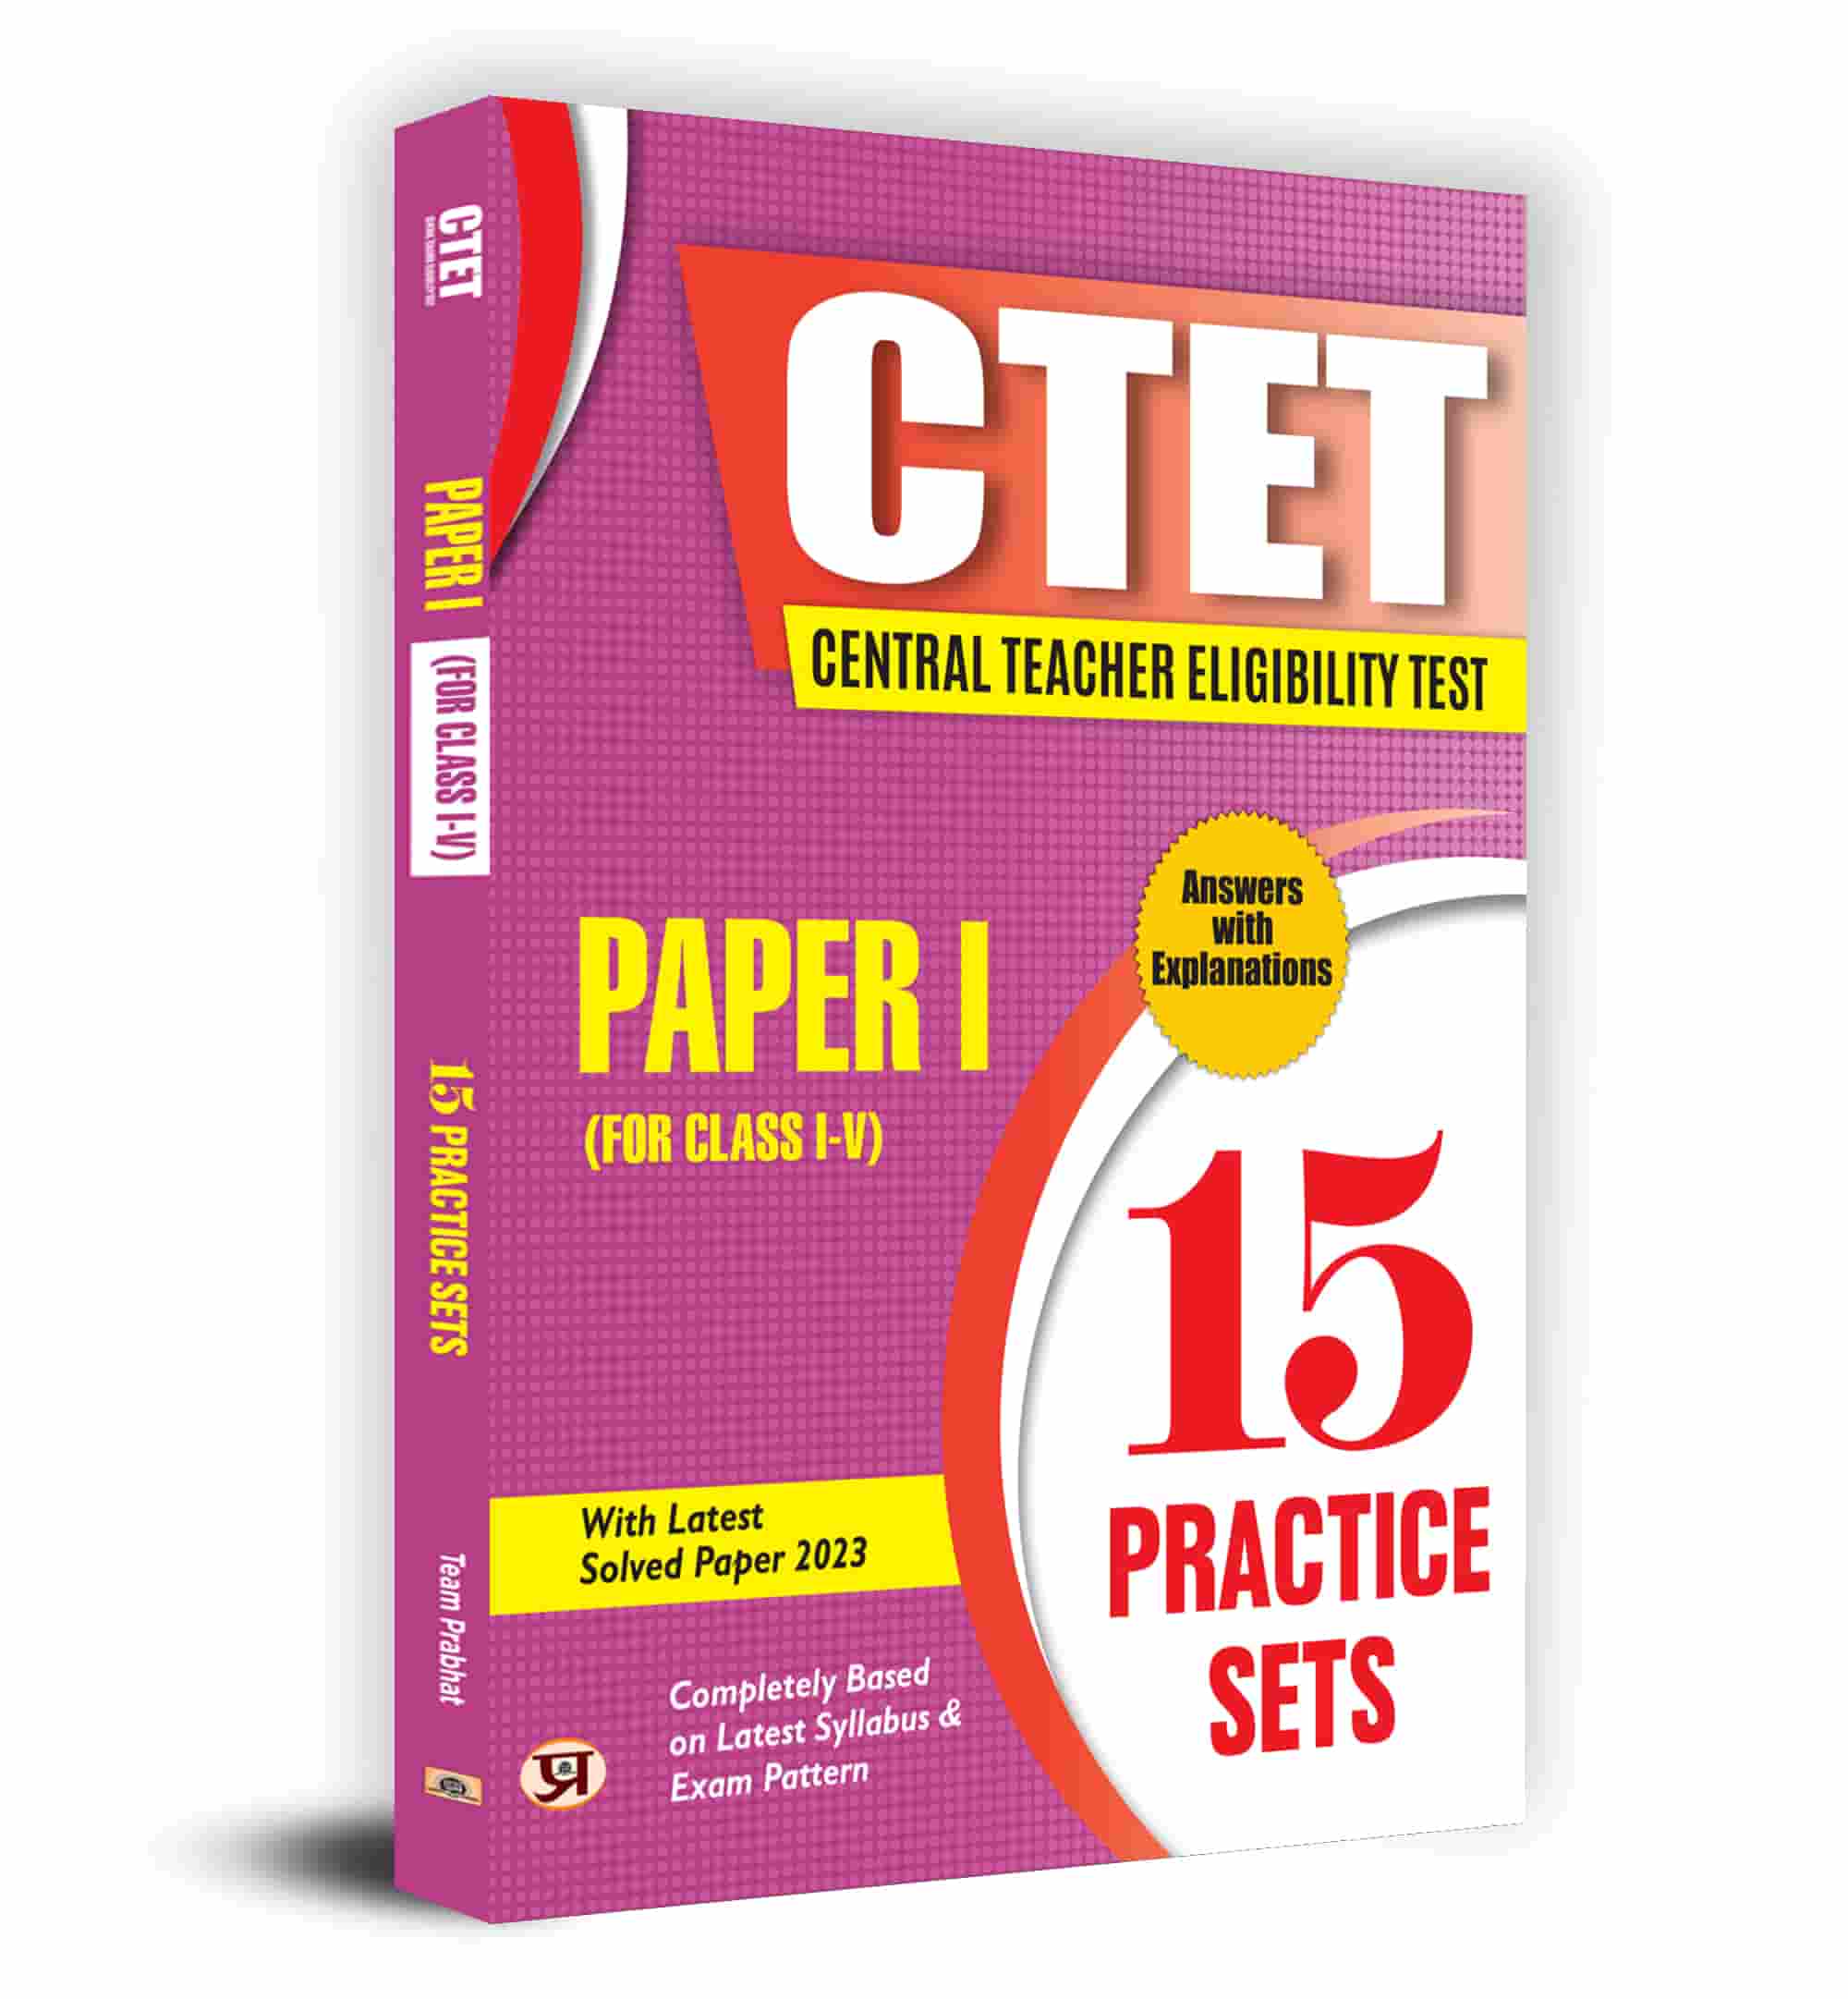 CTET Central Teacher Eligibility Test Paper-1 (Class I-V) 15 Practice Sets with Latest Solved Papers (English)